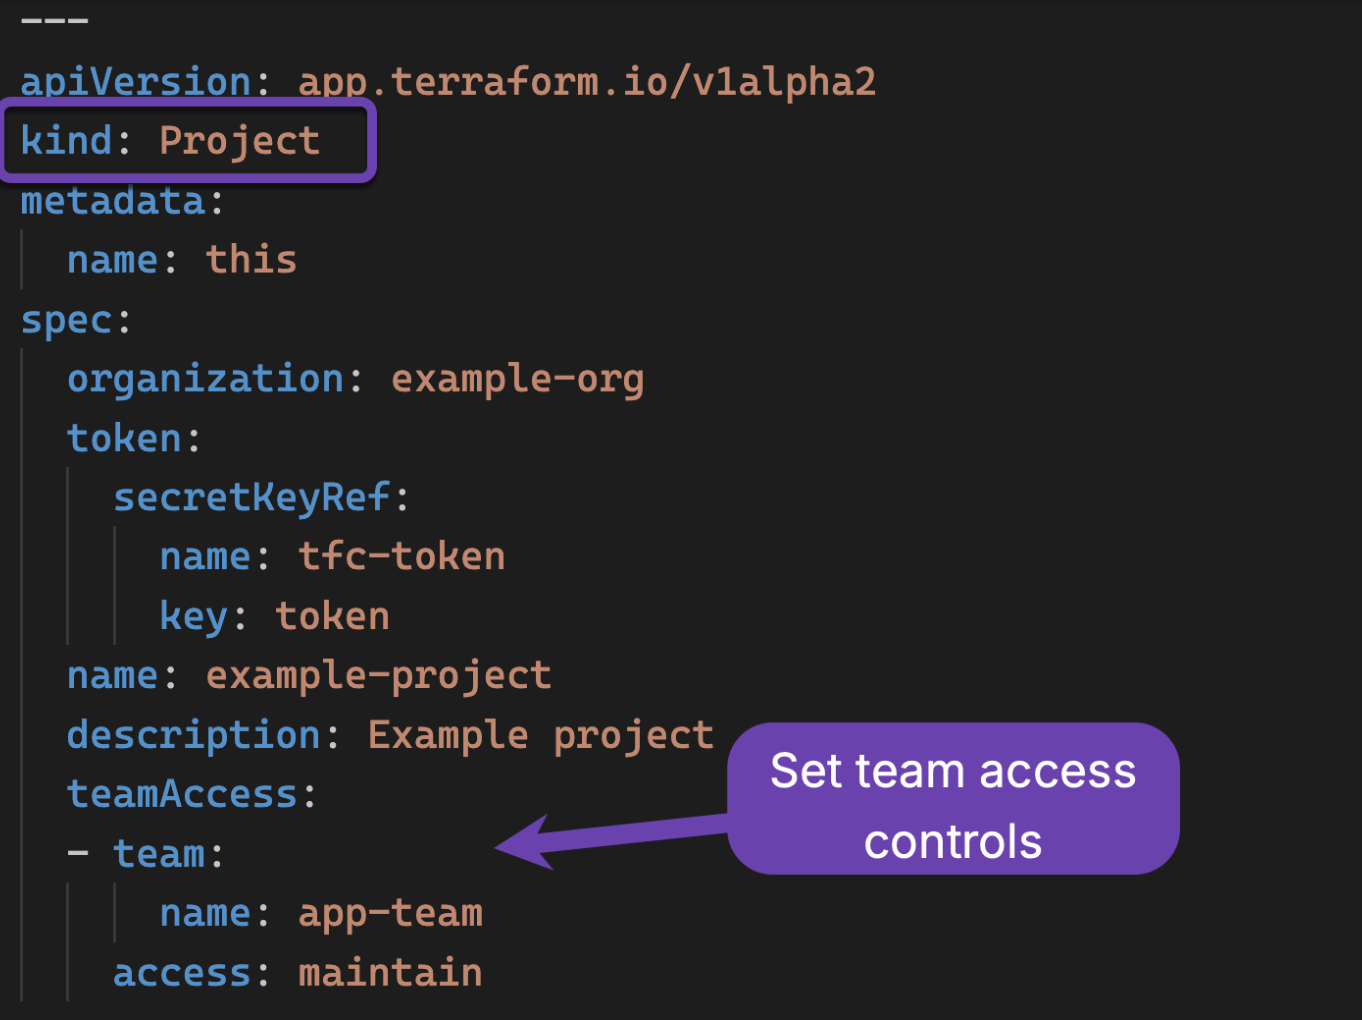 The new Project custom resource manages Terraform Cloud projects and team access